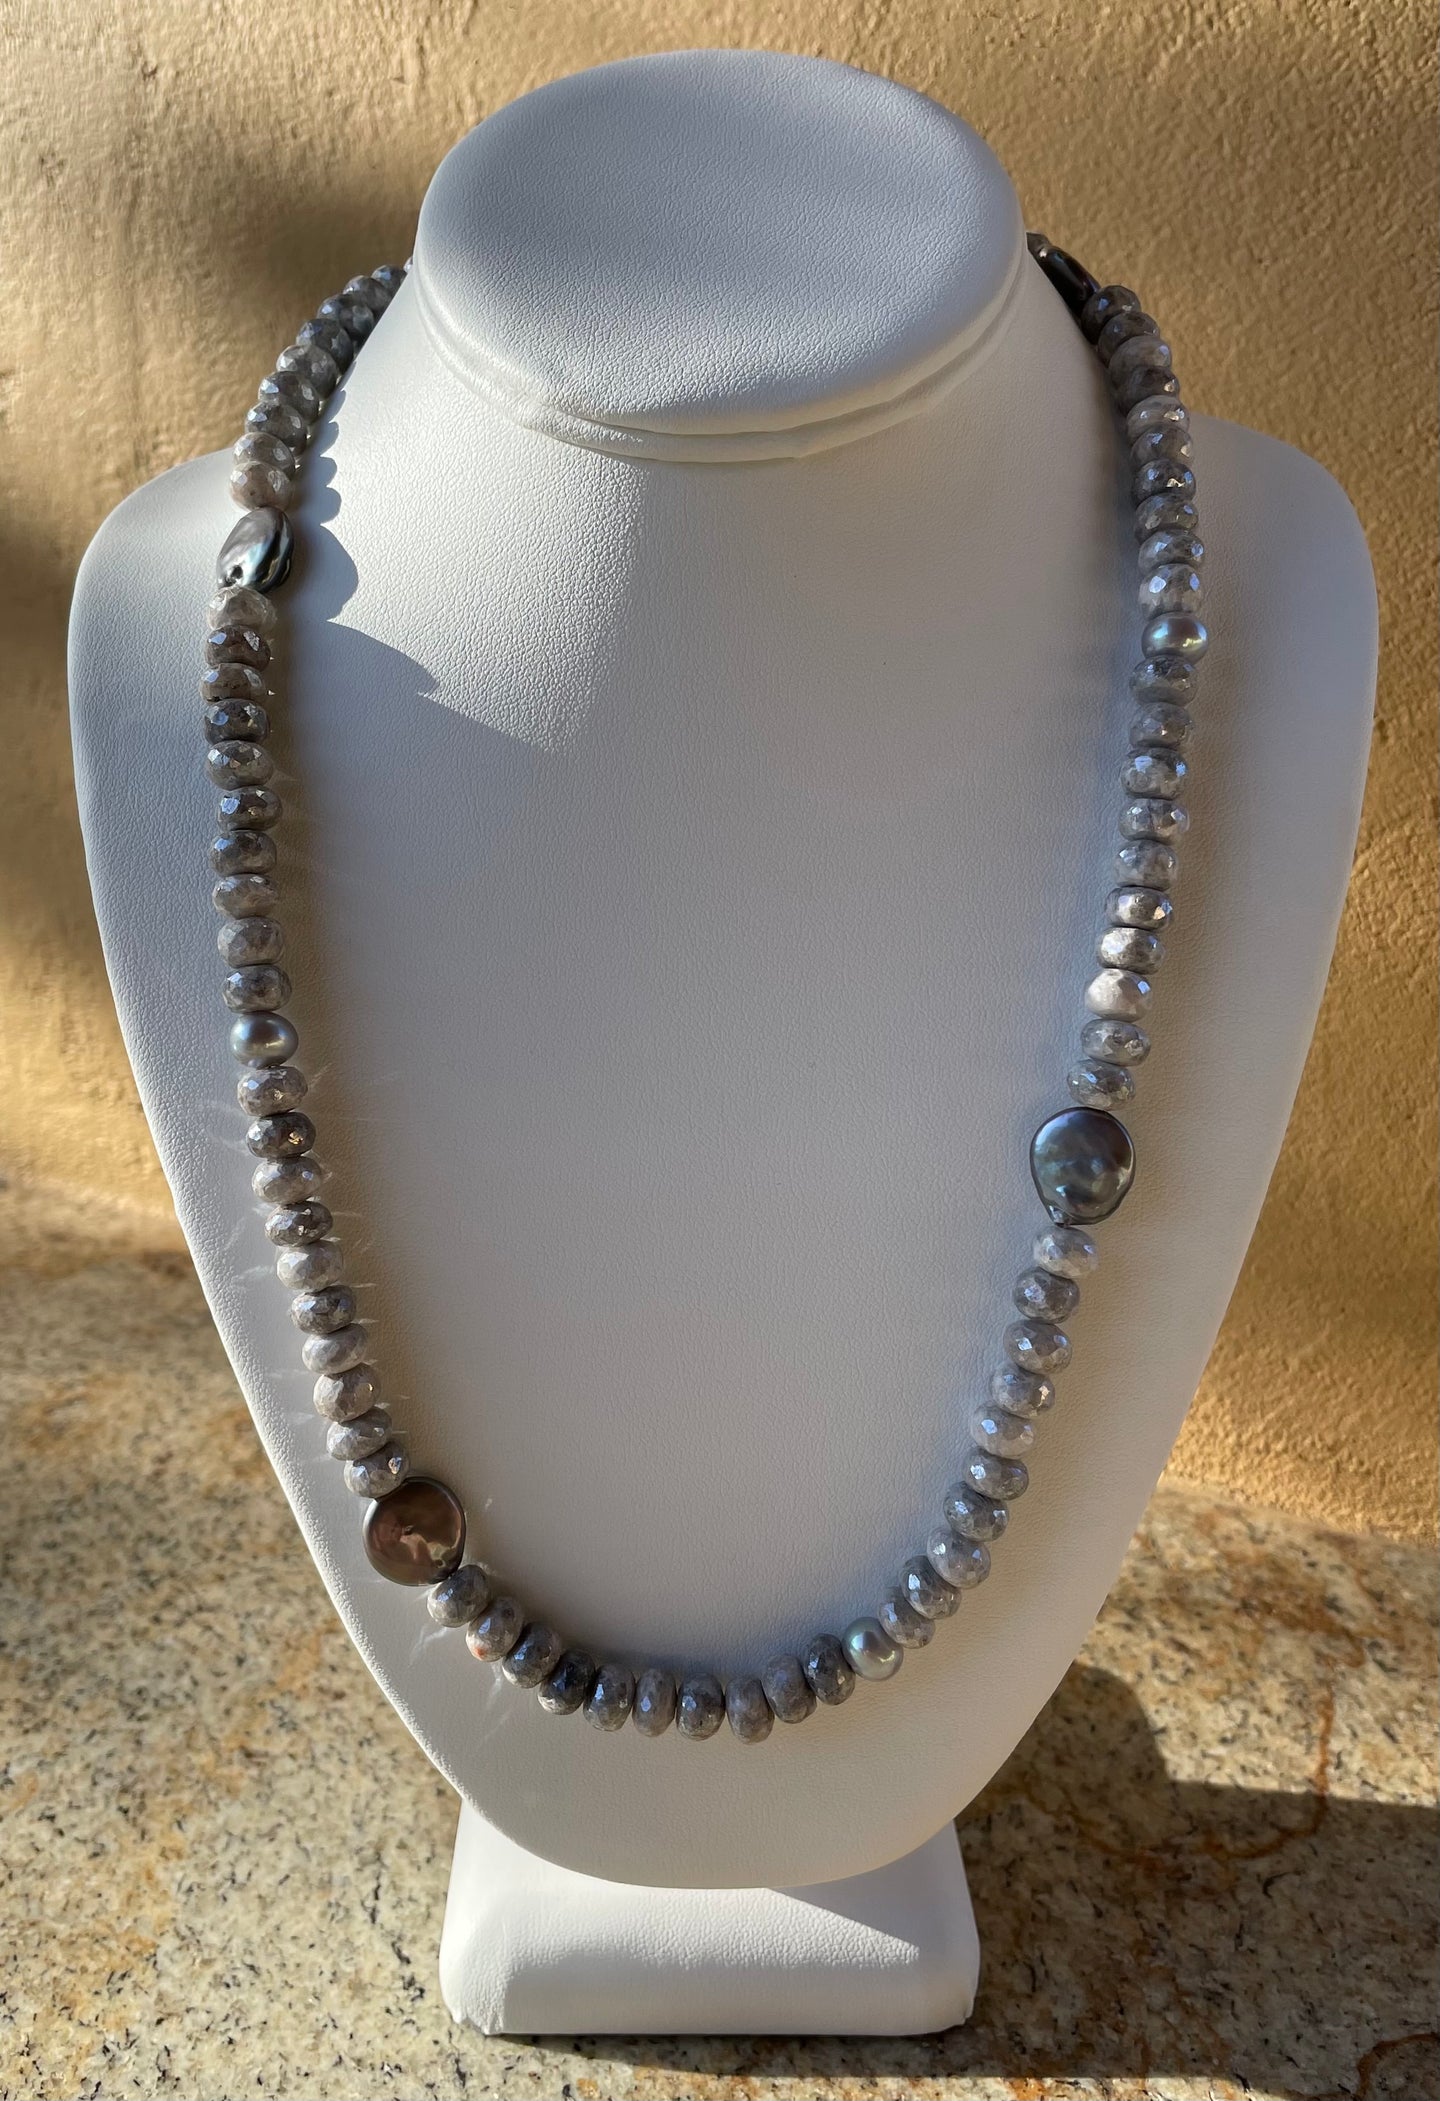 Necklace - Gray opal beaded and pearl necklace